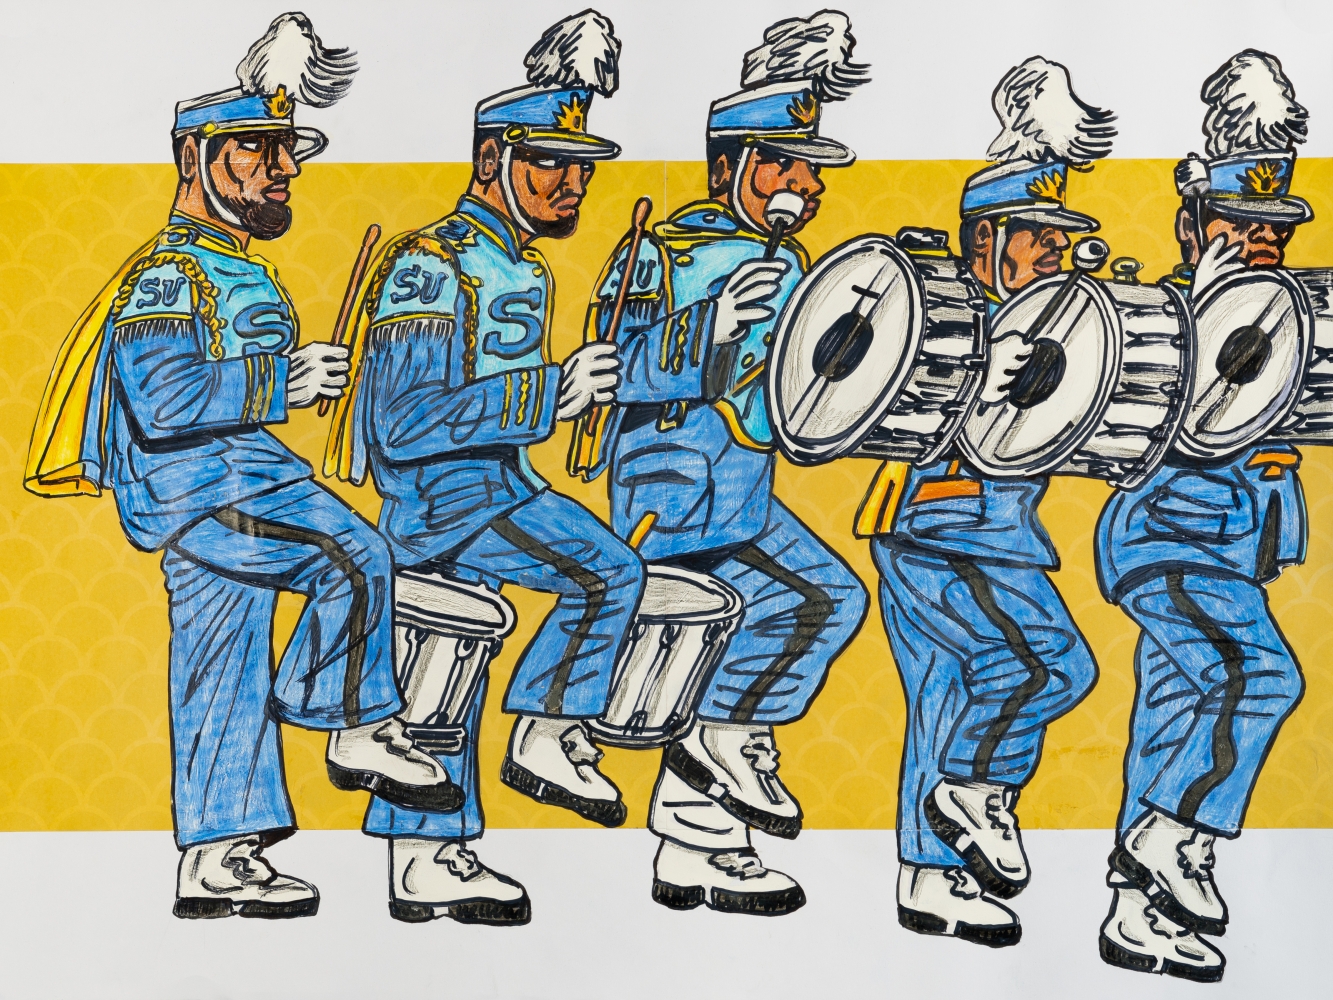 Keith Duncan
Southern Drum Line 1, 2020
Colored pencil and marker on paper
18 x 24 inches&amp;nbsp;